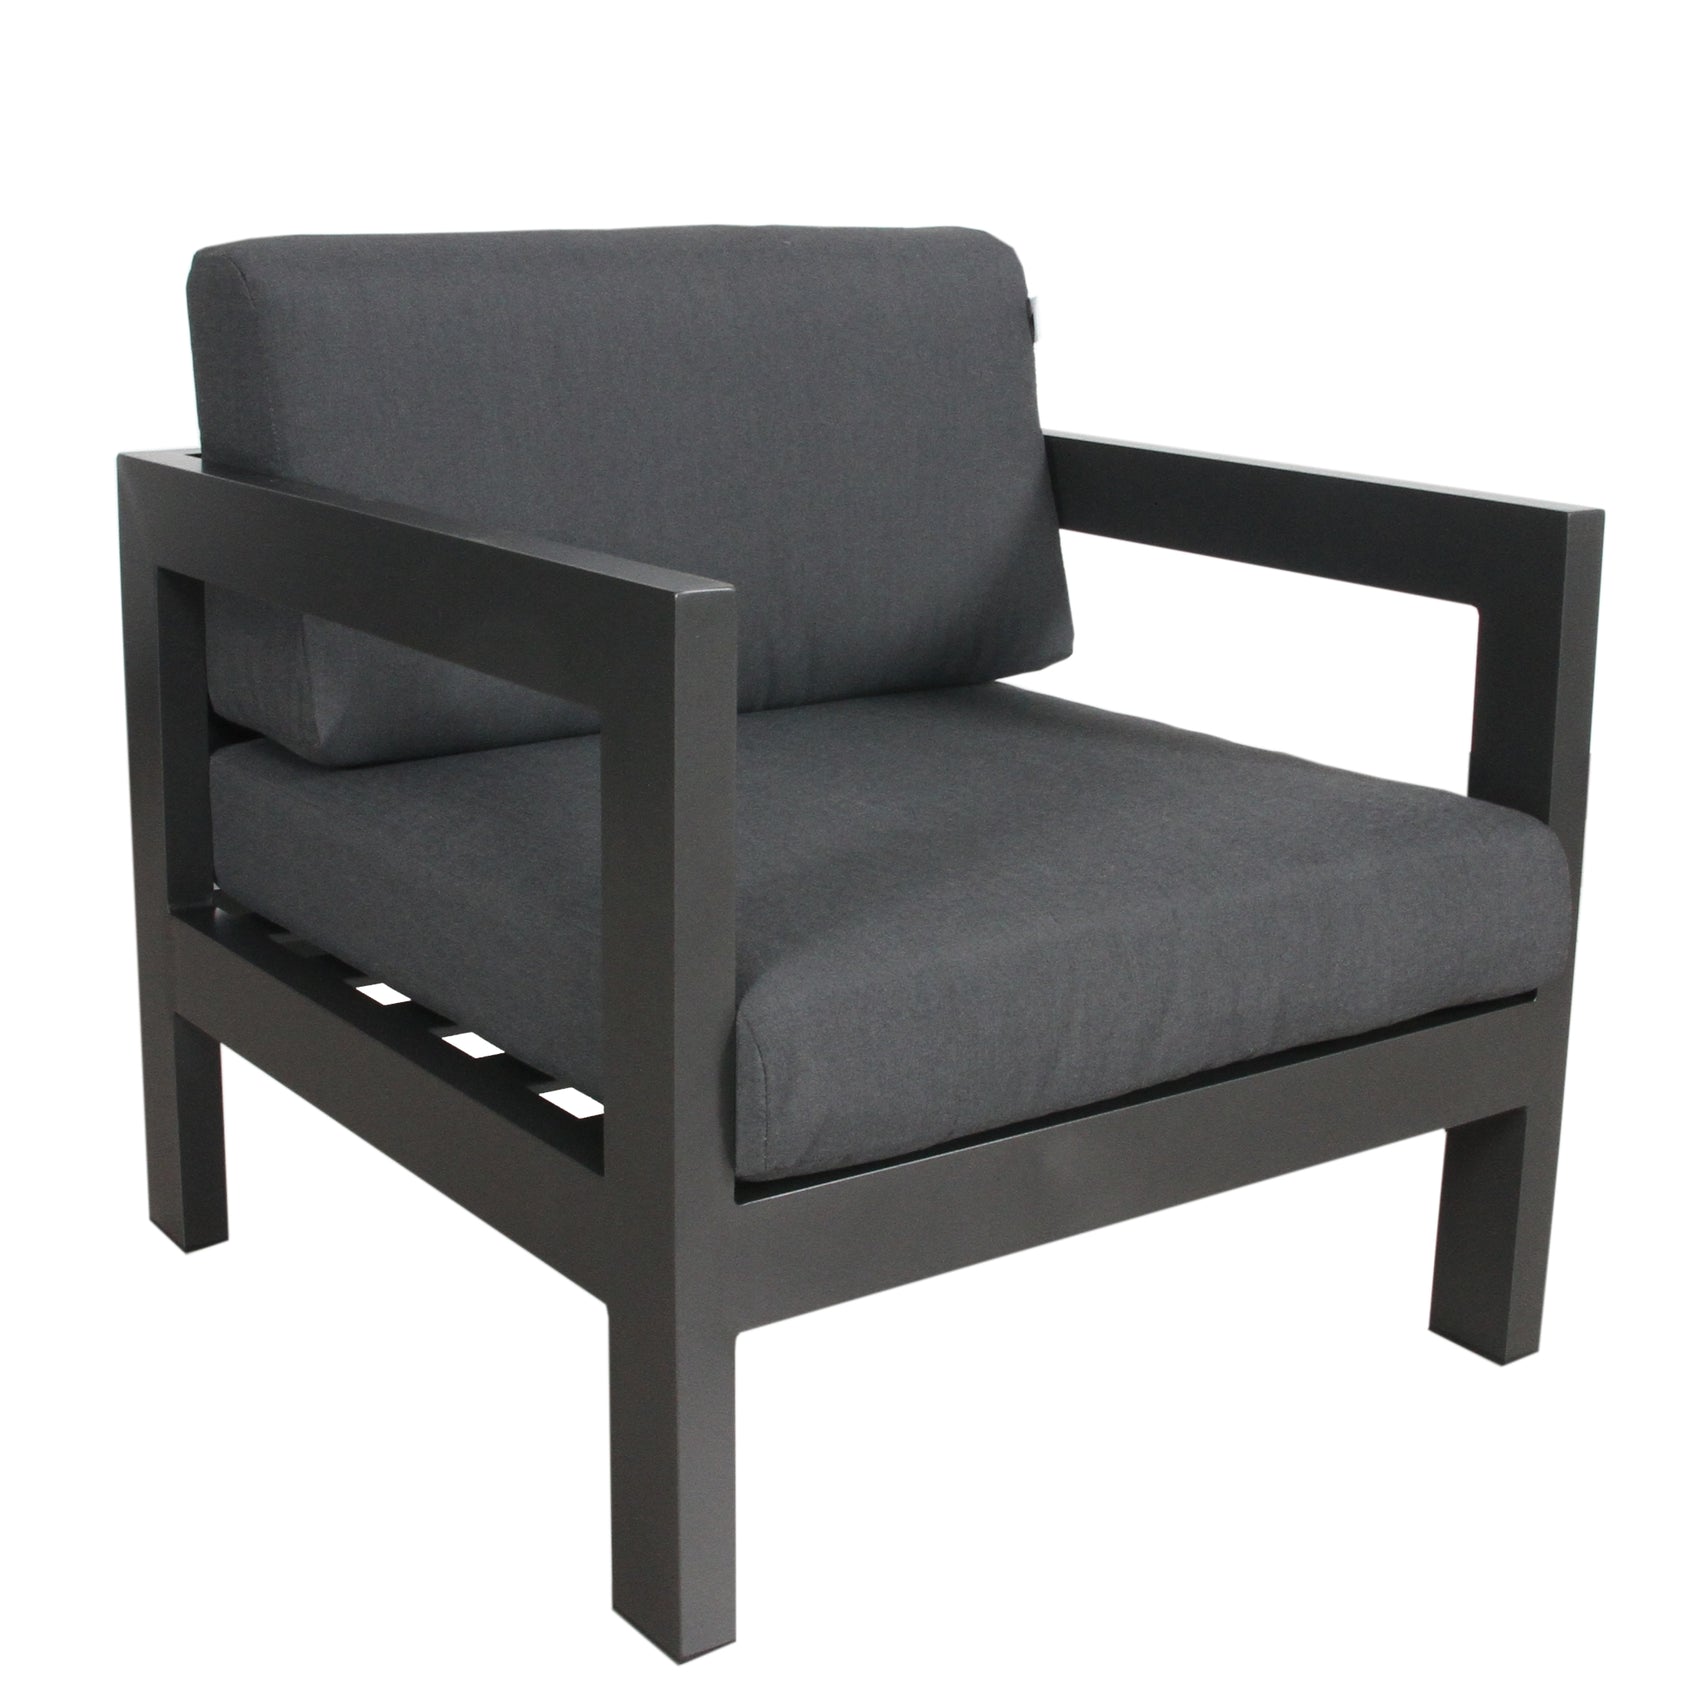 Outie Outdoor Sofa Lounge Chair Aluminium Frame Charcoal